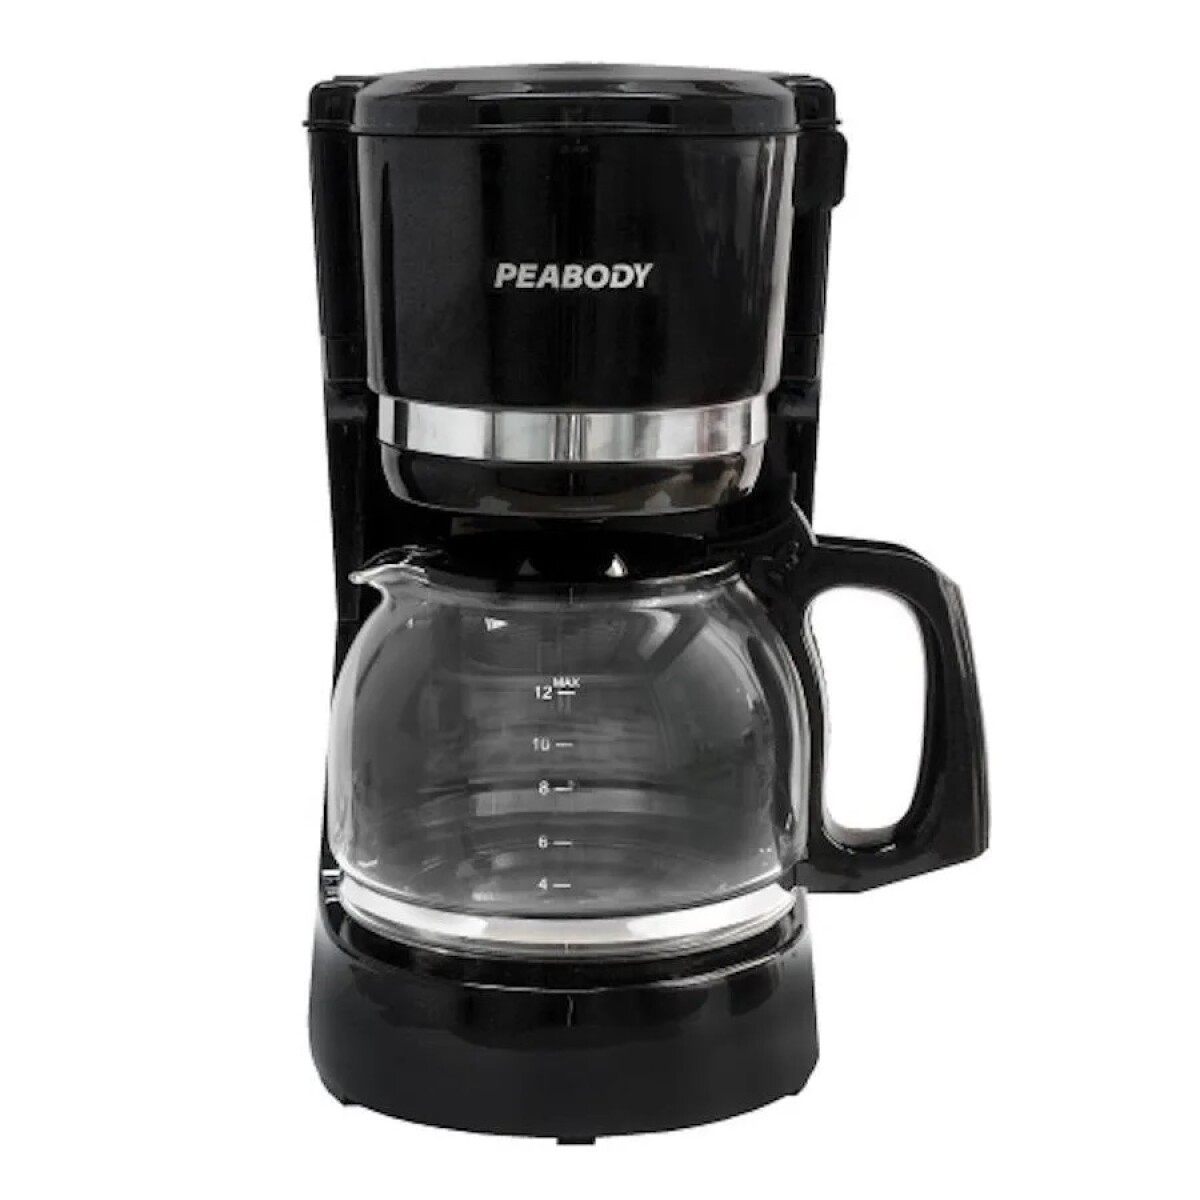 Cafetera Peabody 730w Ct4205 